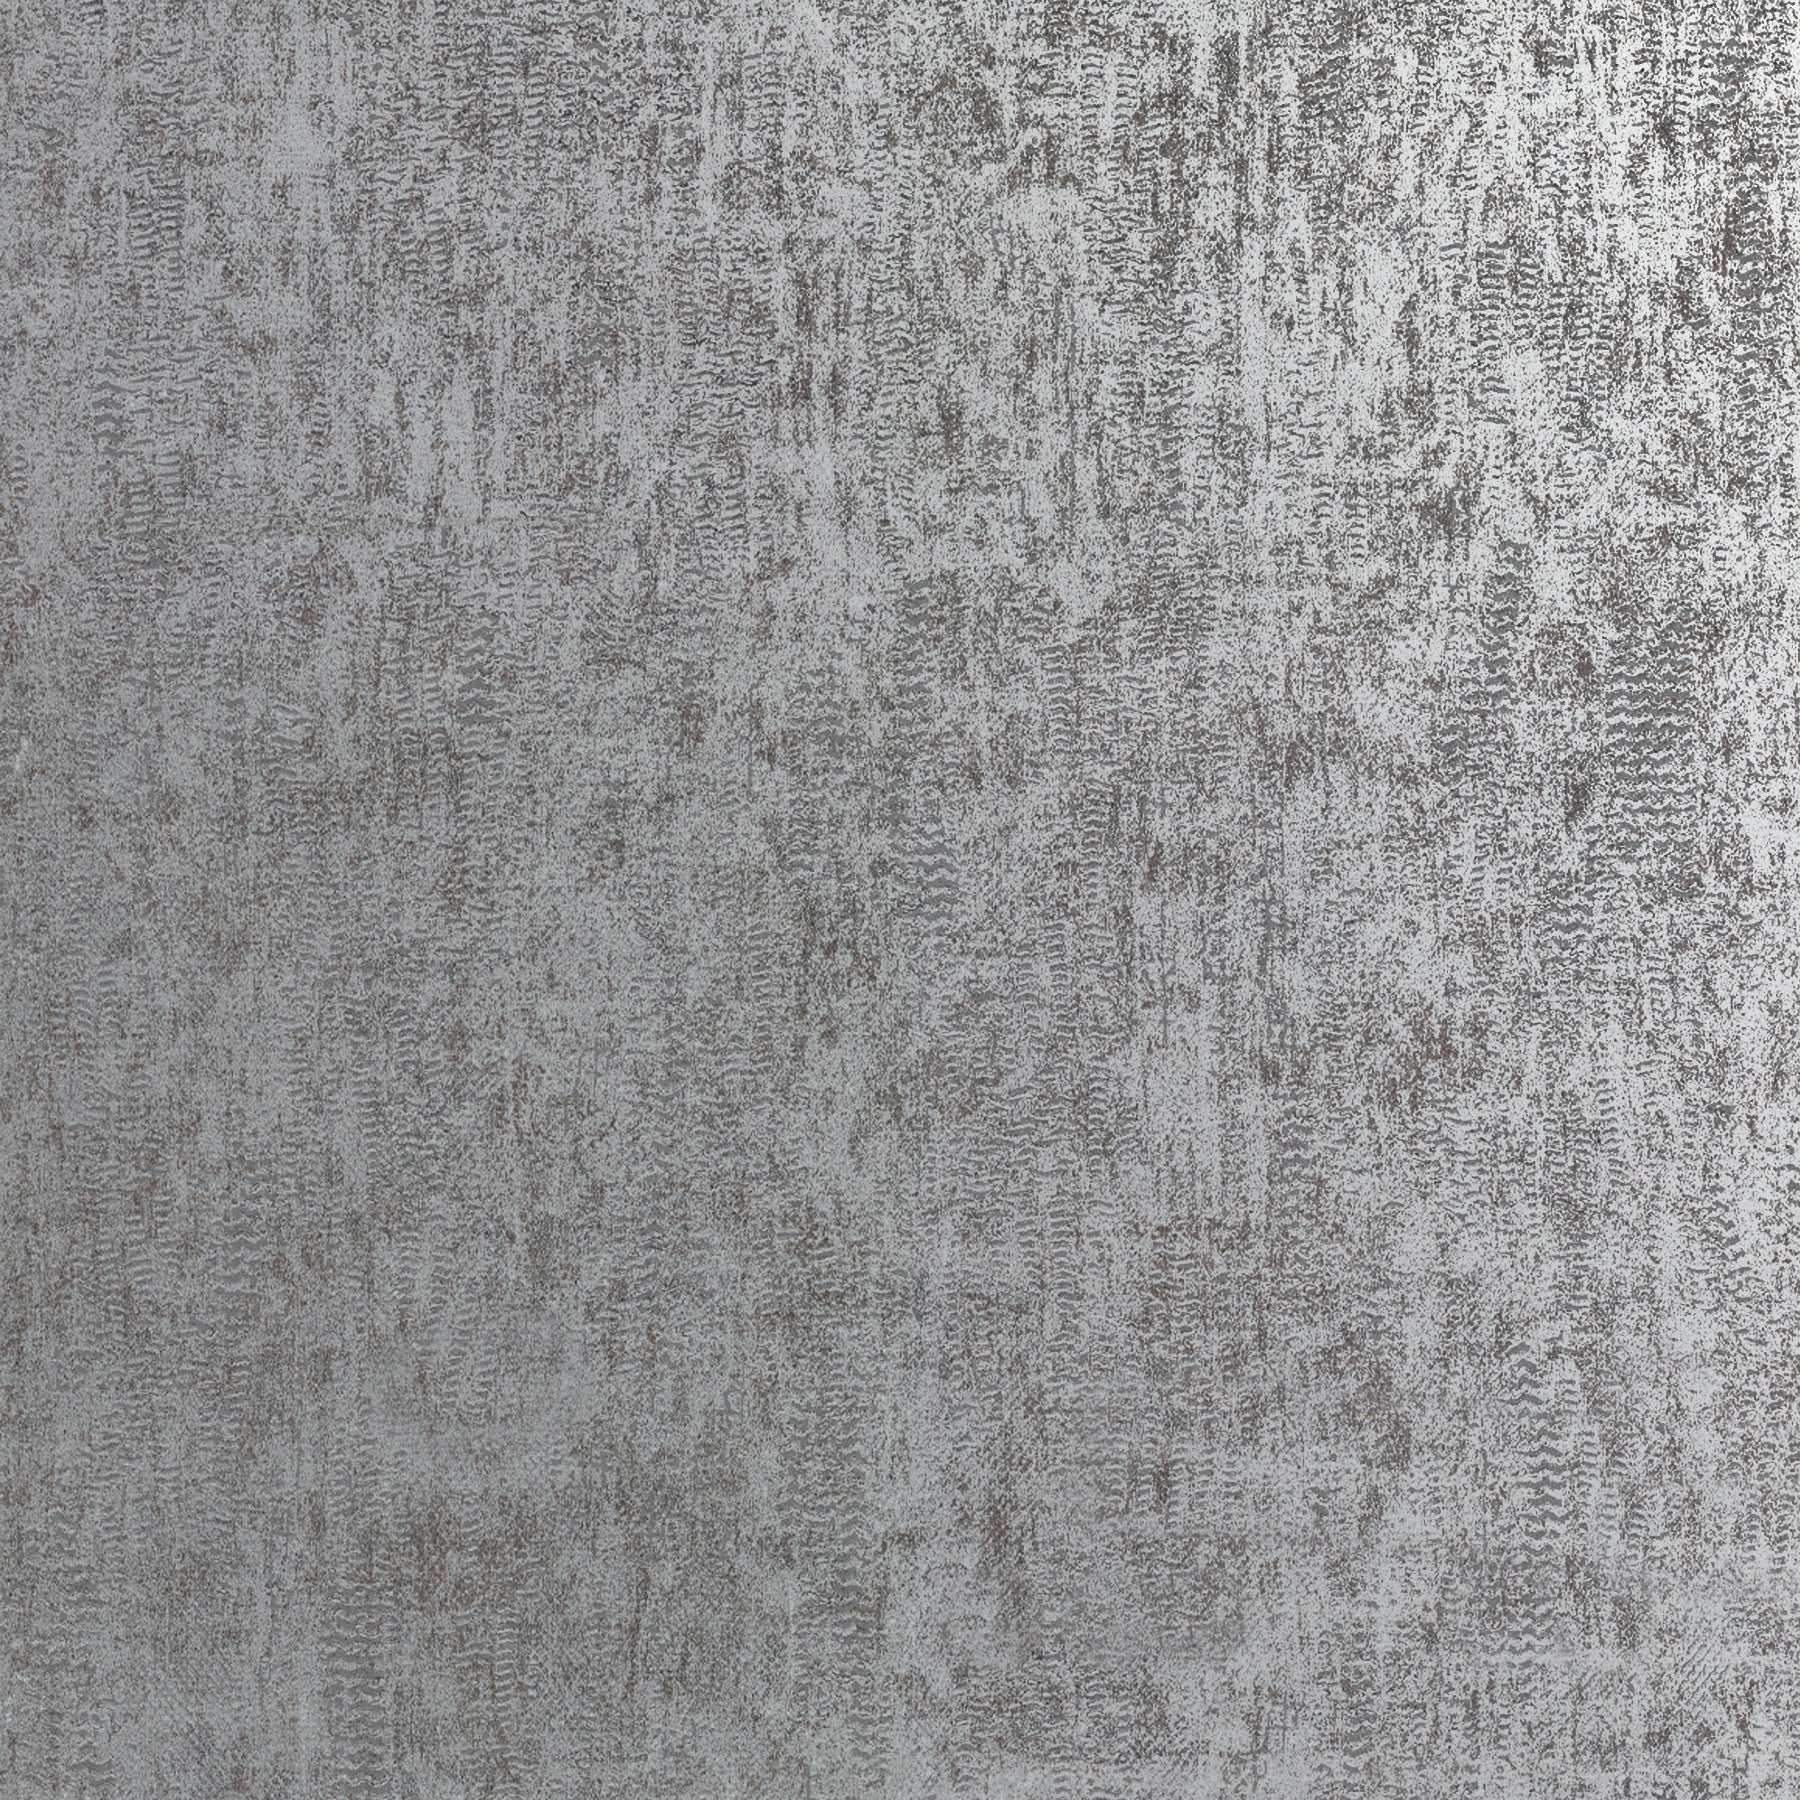 Buy 2927-20301 Polished Luster Silver Distressed Texture Silver Brewster Wallpaper